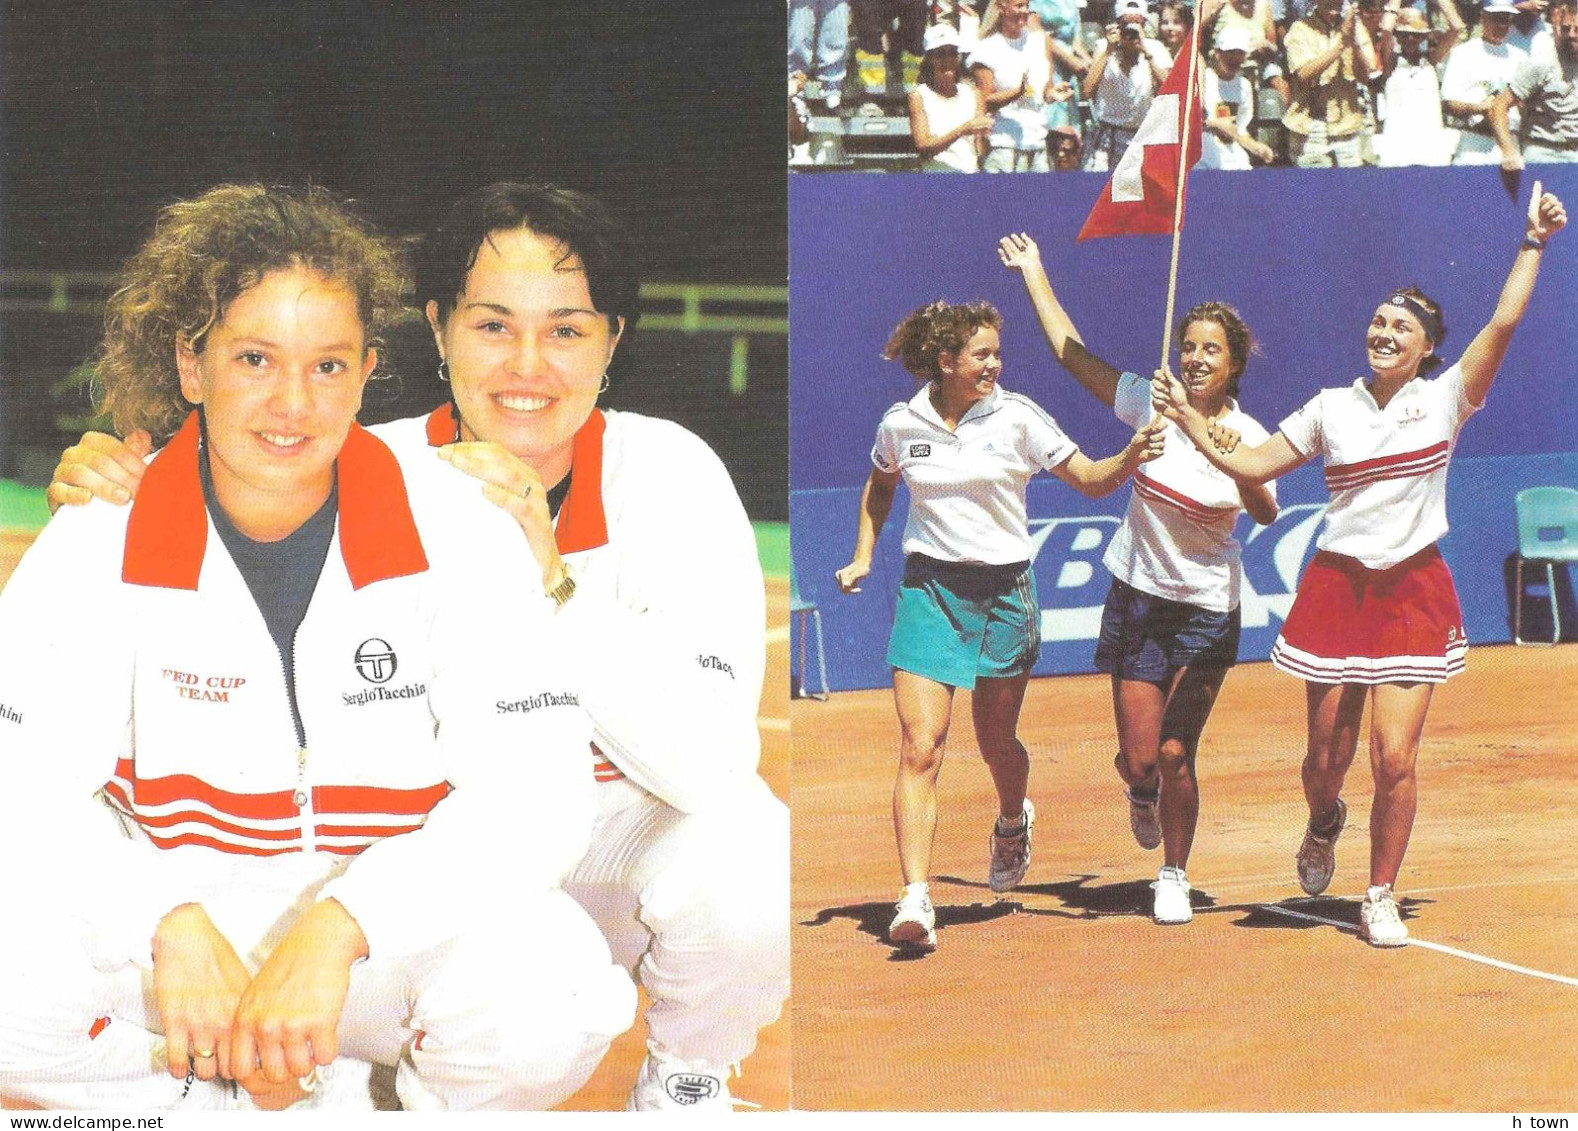 820  Jeux Olympiques Torino: Sion, Ville Candidate - 2006 Winter Olympics Candidate: Sion, Switzerland. Tennis Fed Cup - Winter 2006: Turin